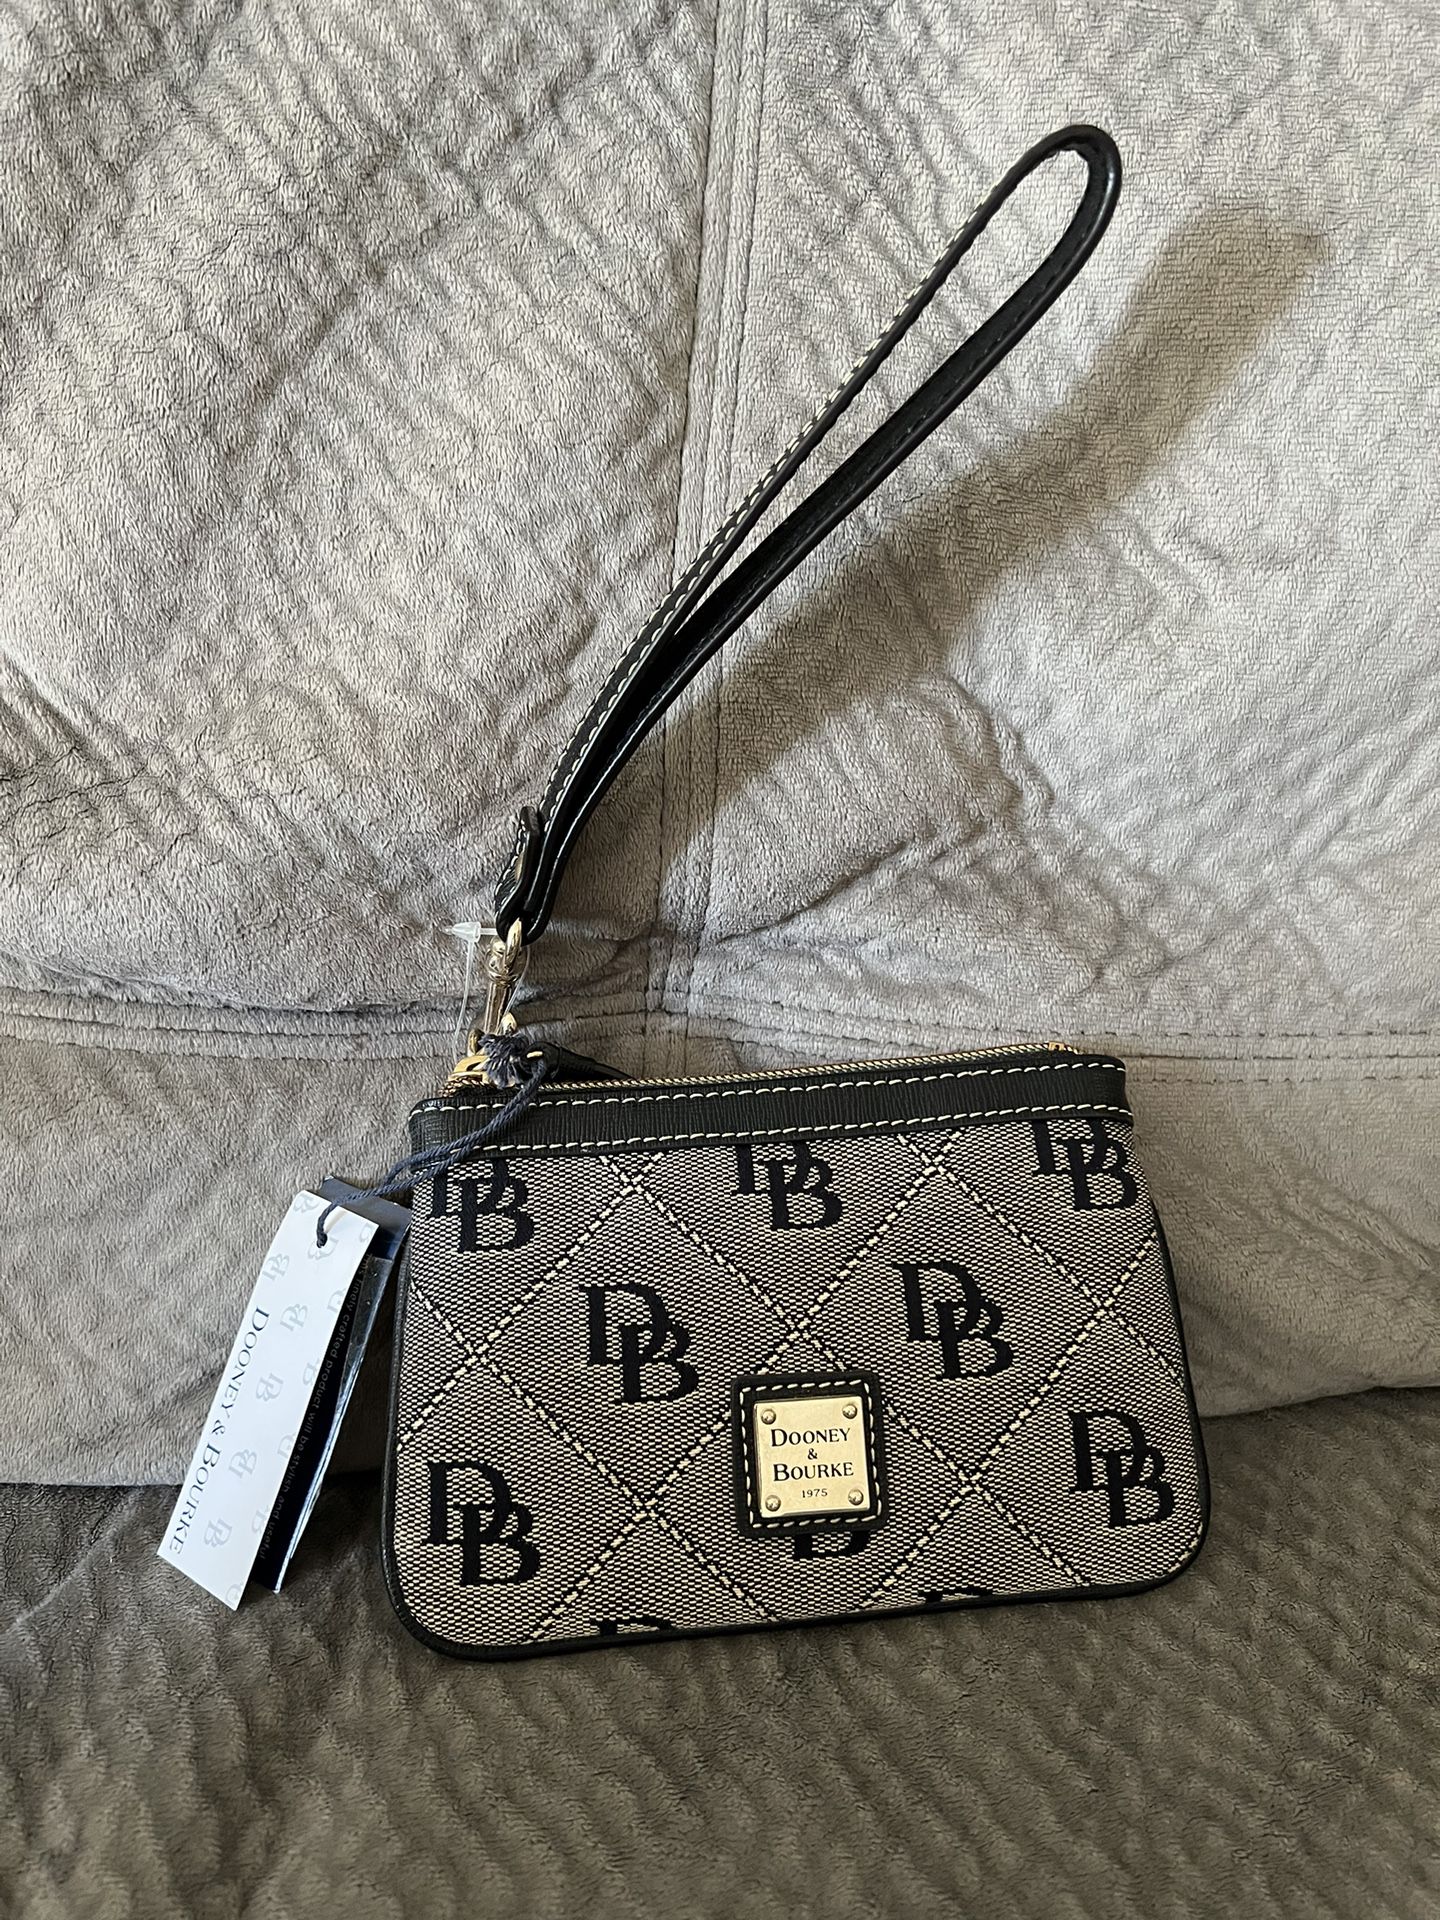 Brand New Dooney & Bourke Wristlet - PICKUP IN AIEA - I DON’T DELIVER - PRICE IS FIRM - NO LOW BALLERS 